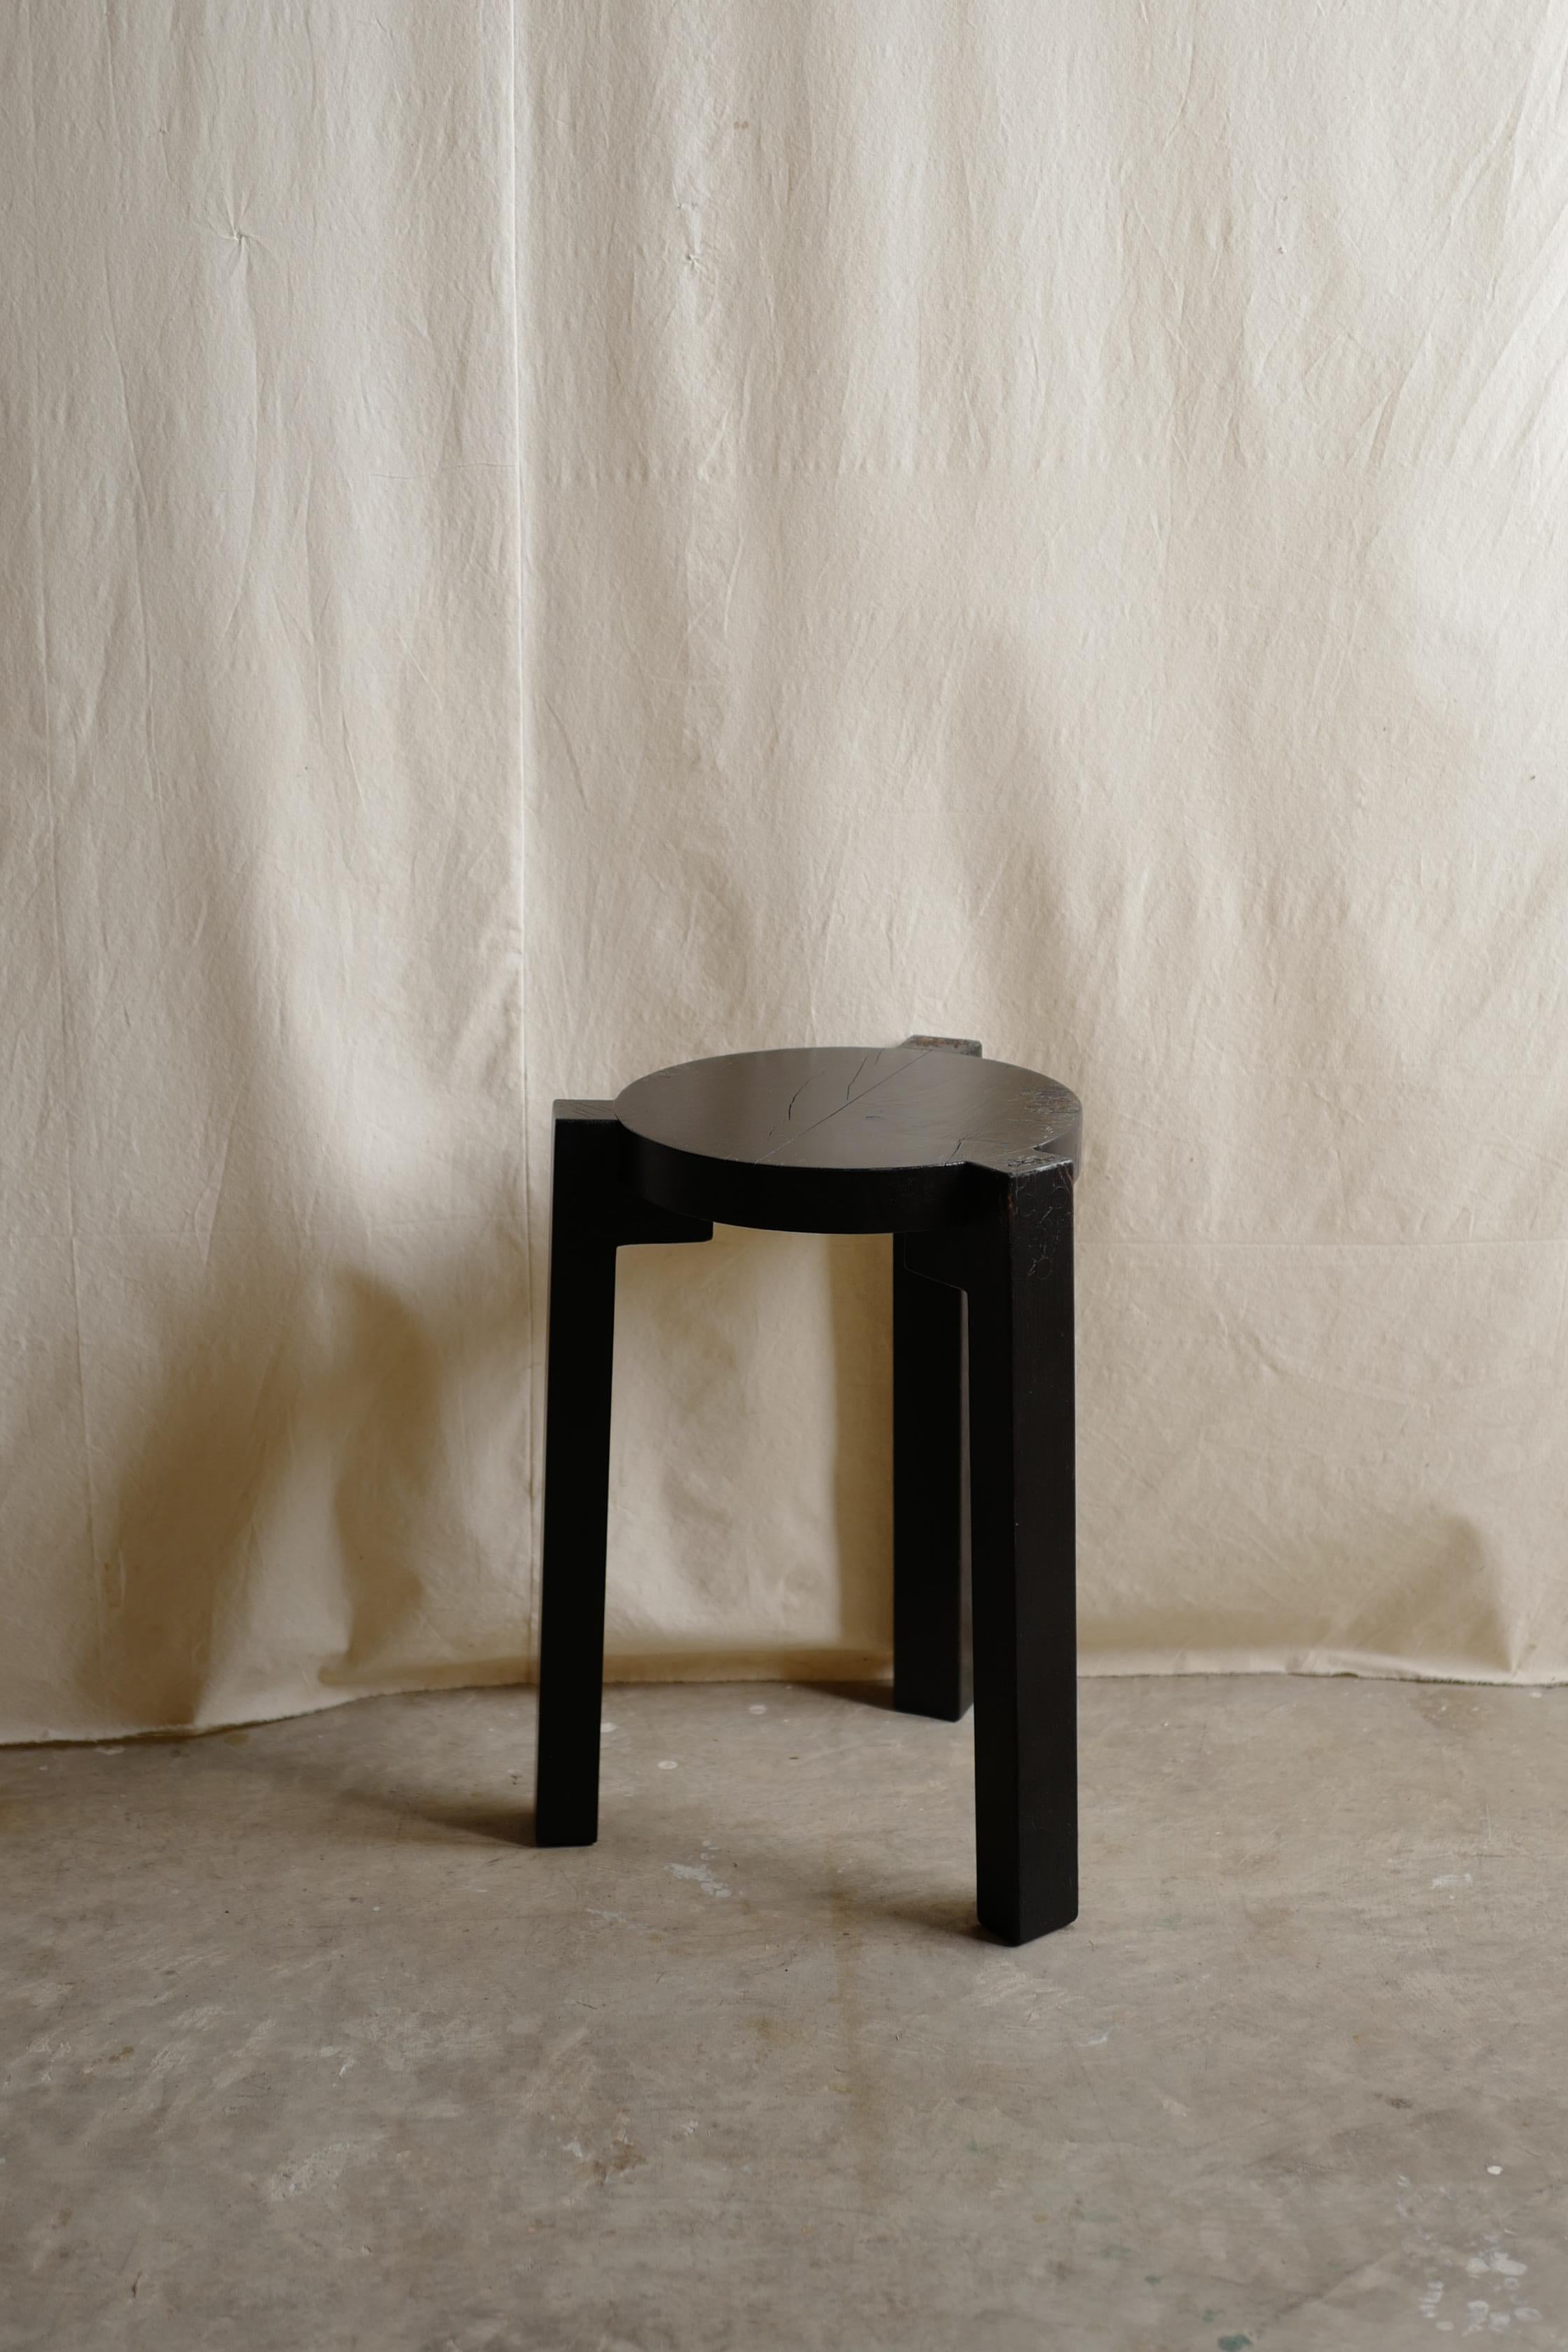 giraff stool manufactured by Baraúna designed by Lina Bo Bardi.
This carbon version is not normally sold. It was probably created as a prototype. So it means early product.